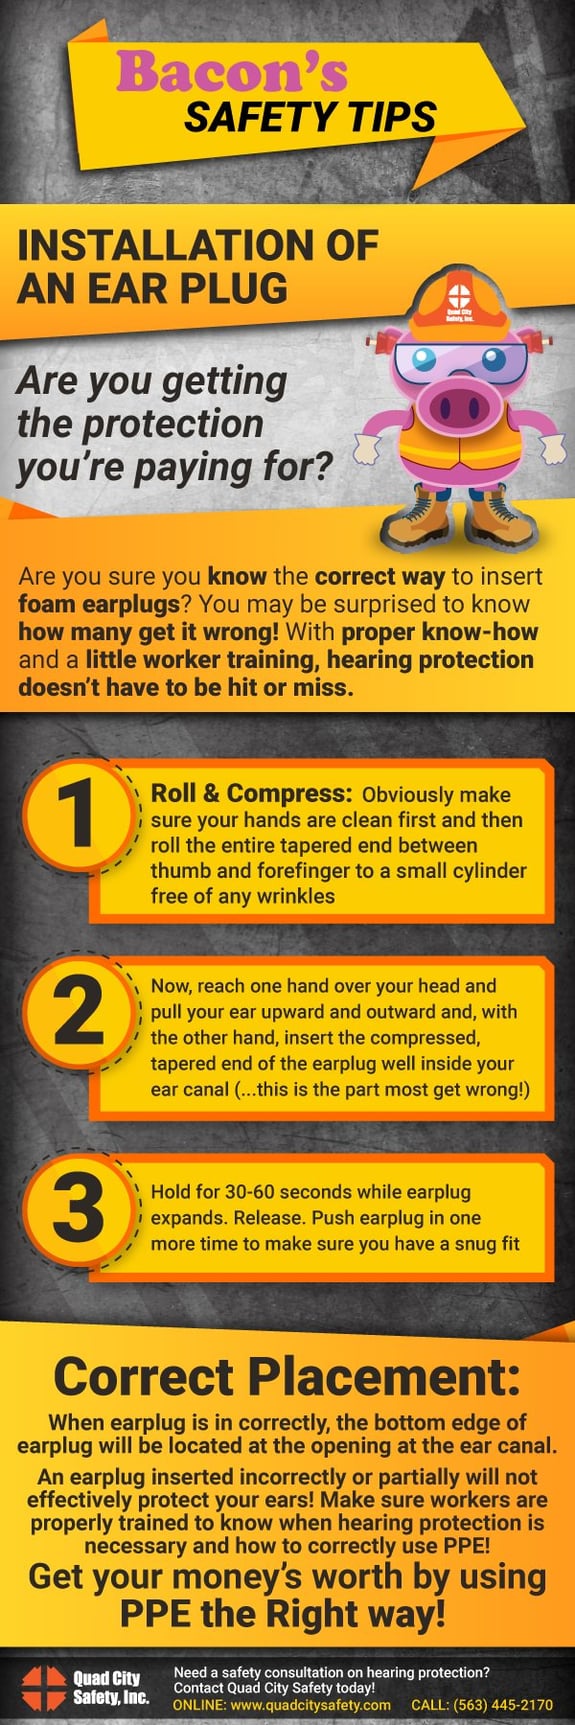 Bacon’s Safety Tips Installation of an earplug.